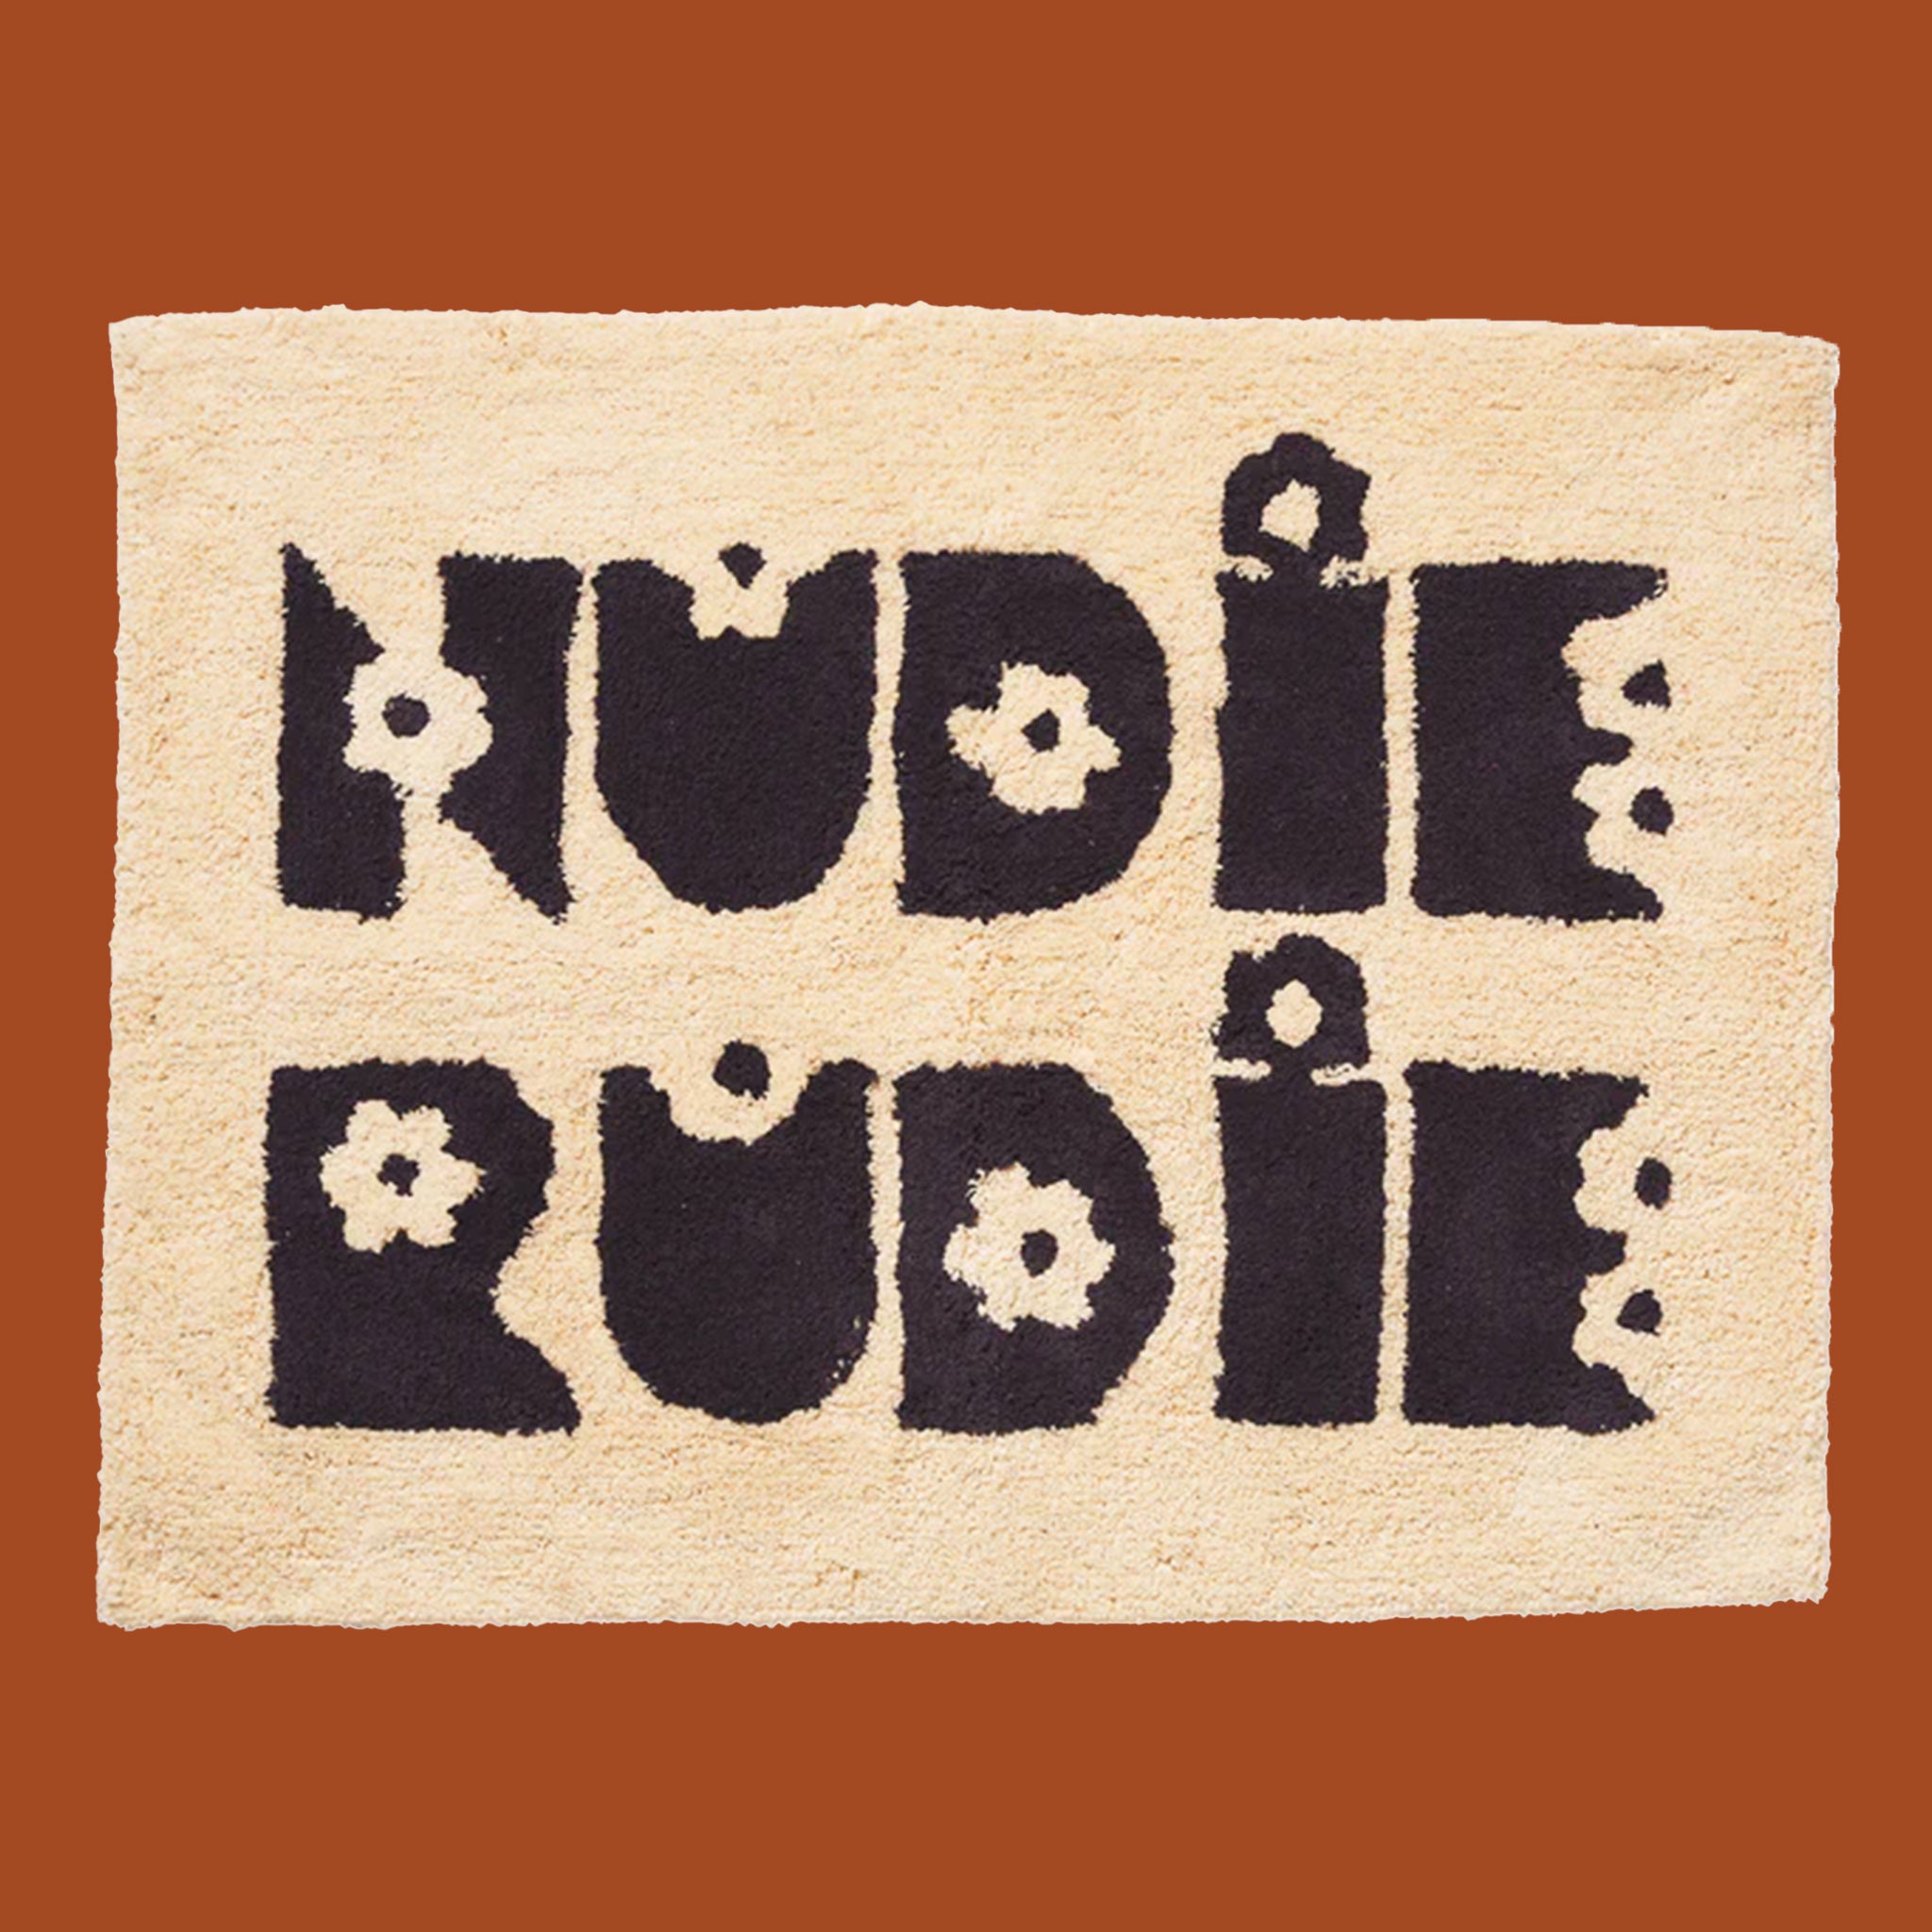 On a burnt orange background is a tan bath mat with black text that reads, "Nudie Rudie".